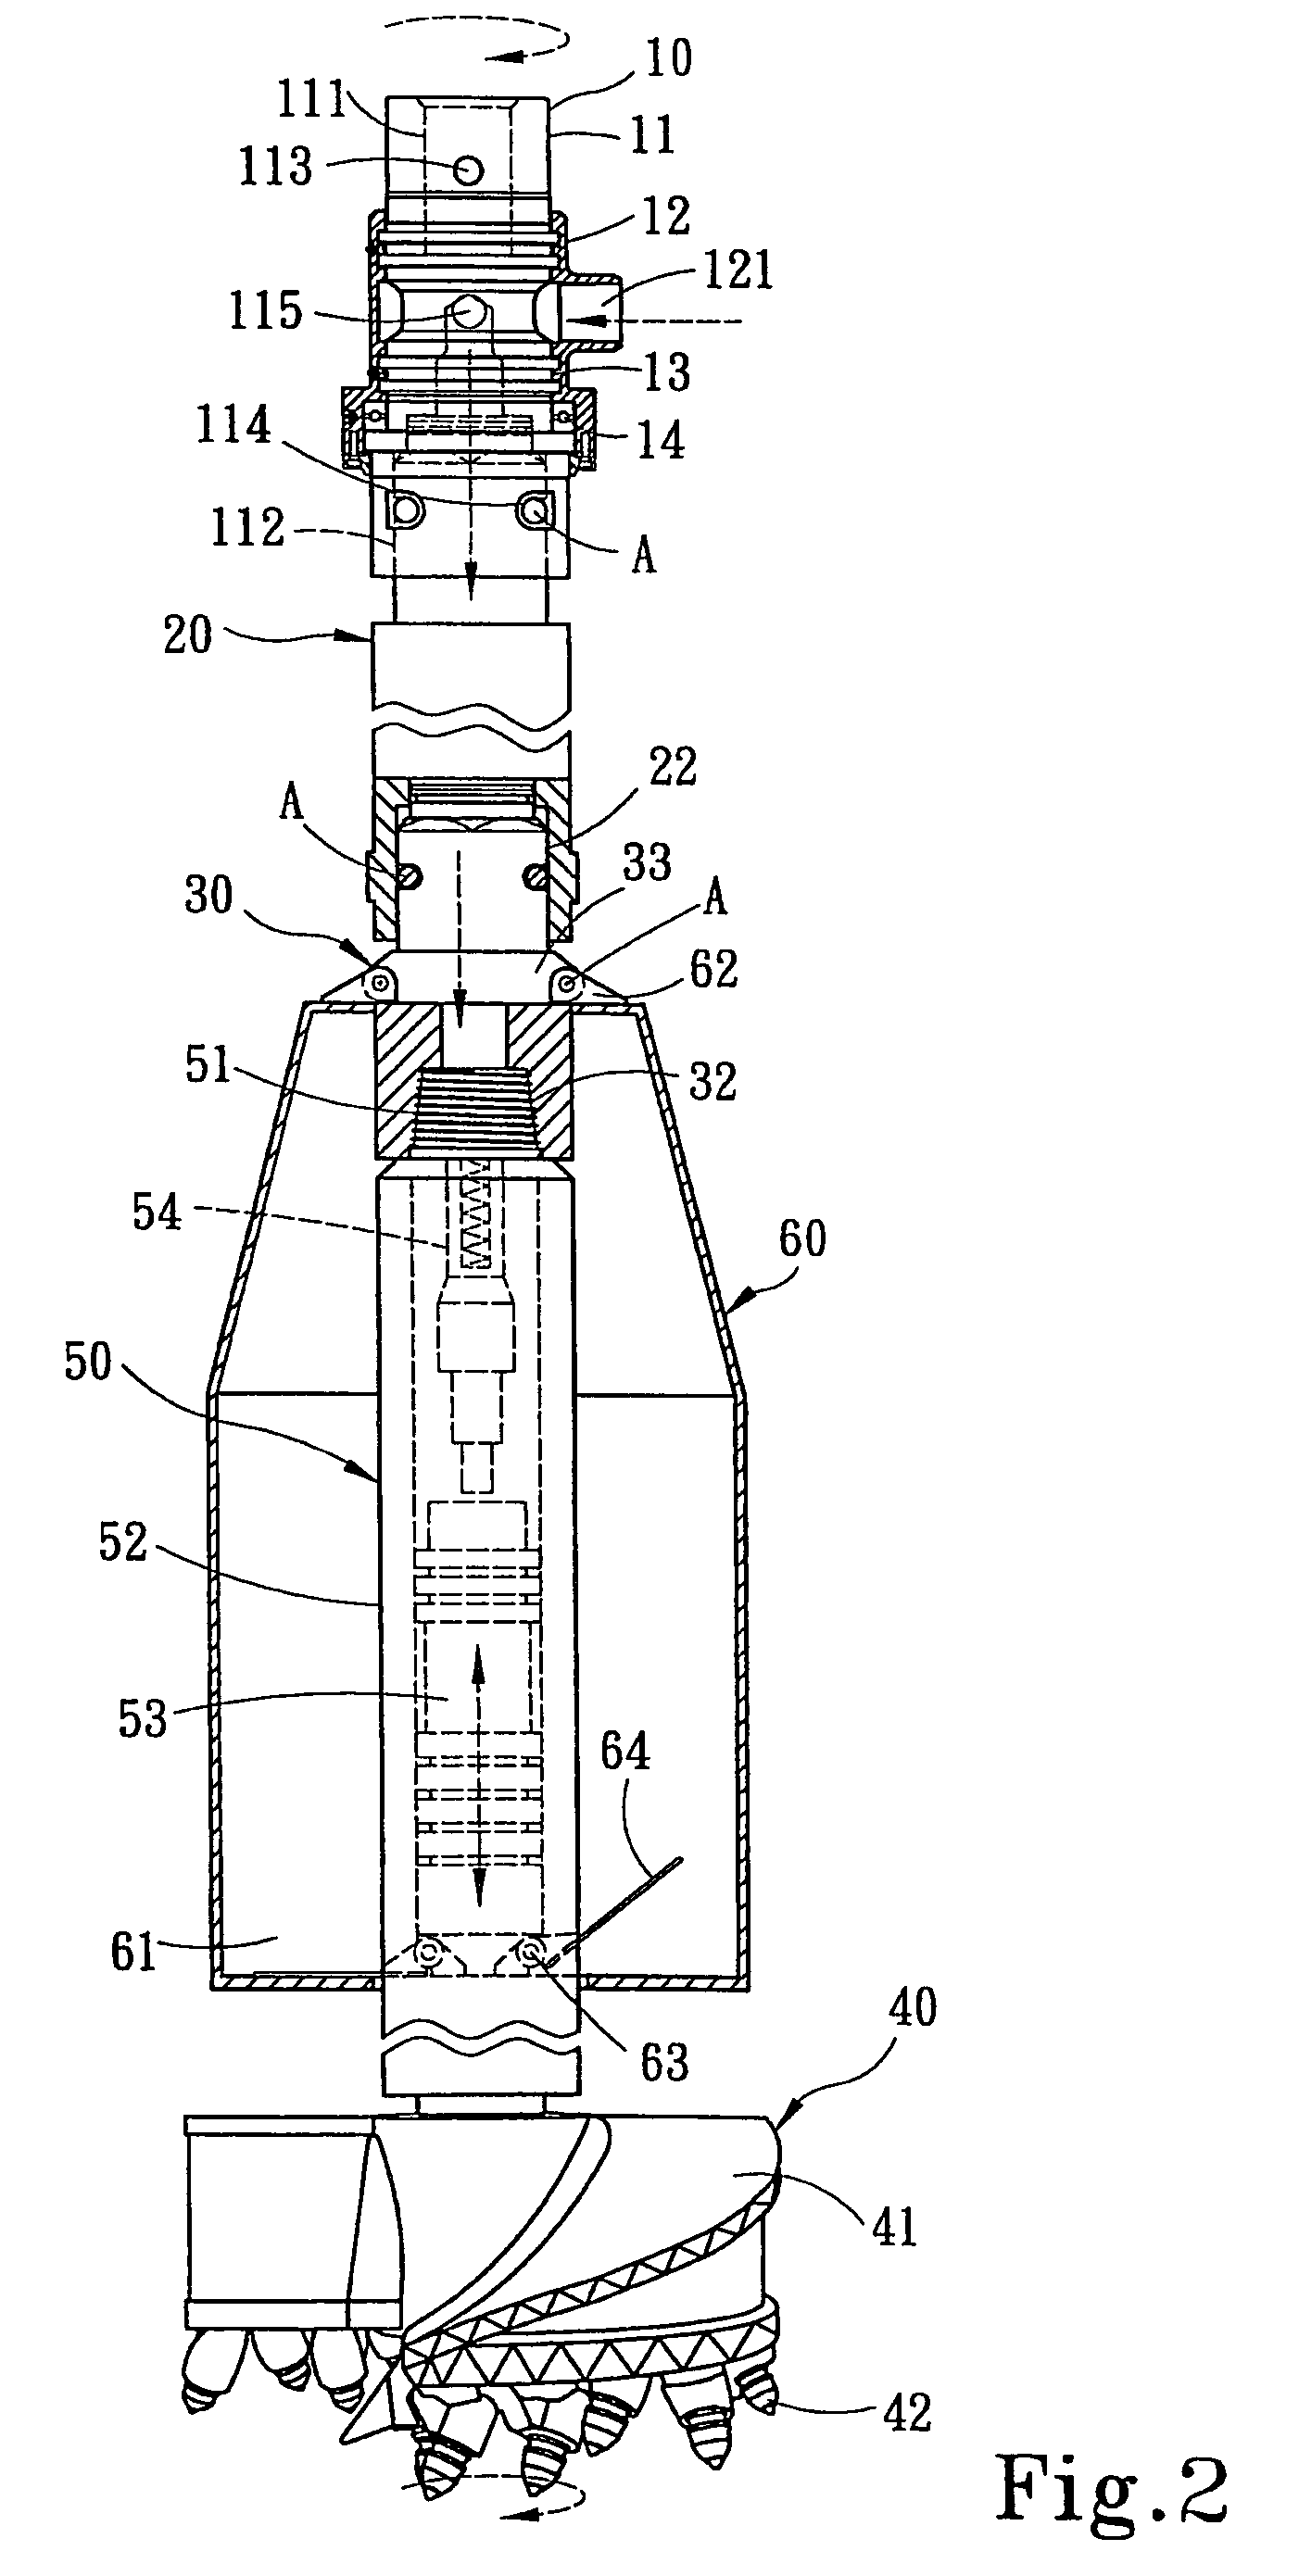 Bedrock drilling and excavating apparatus